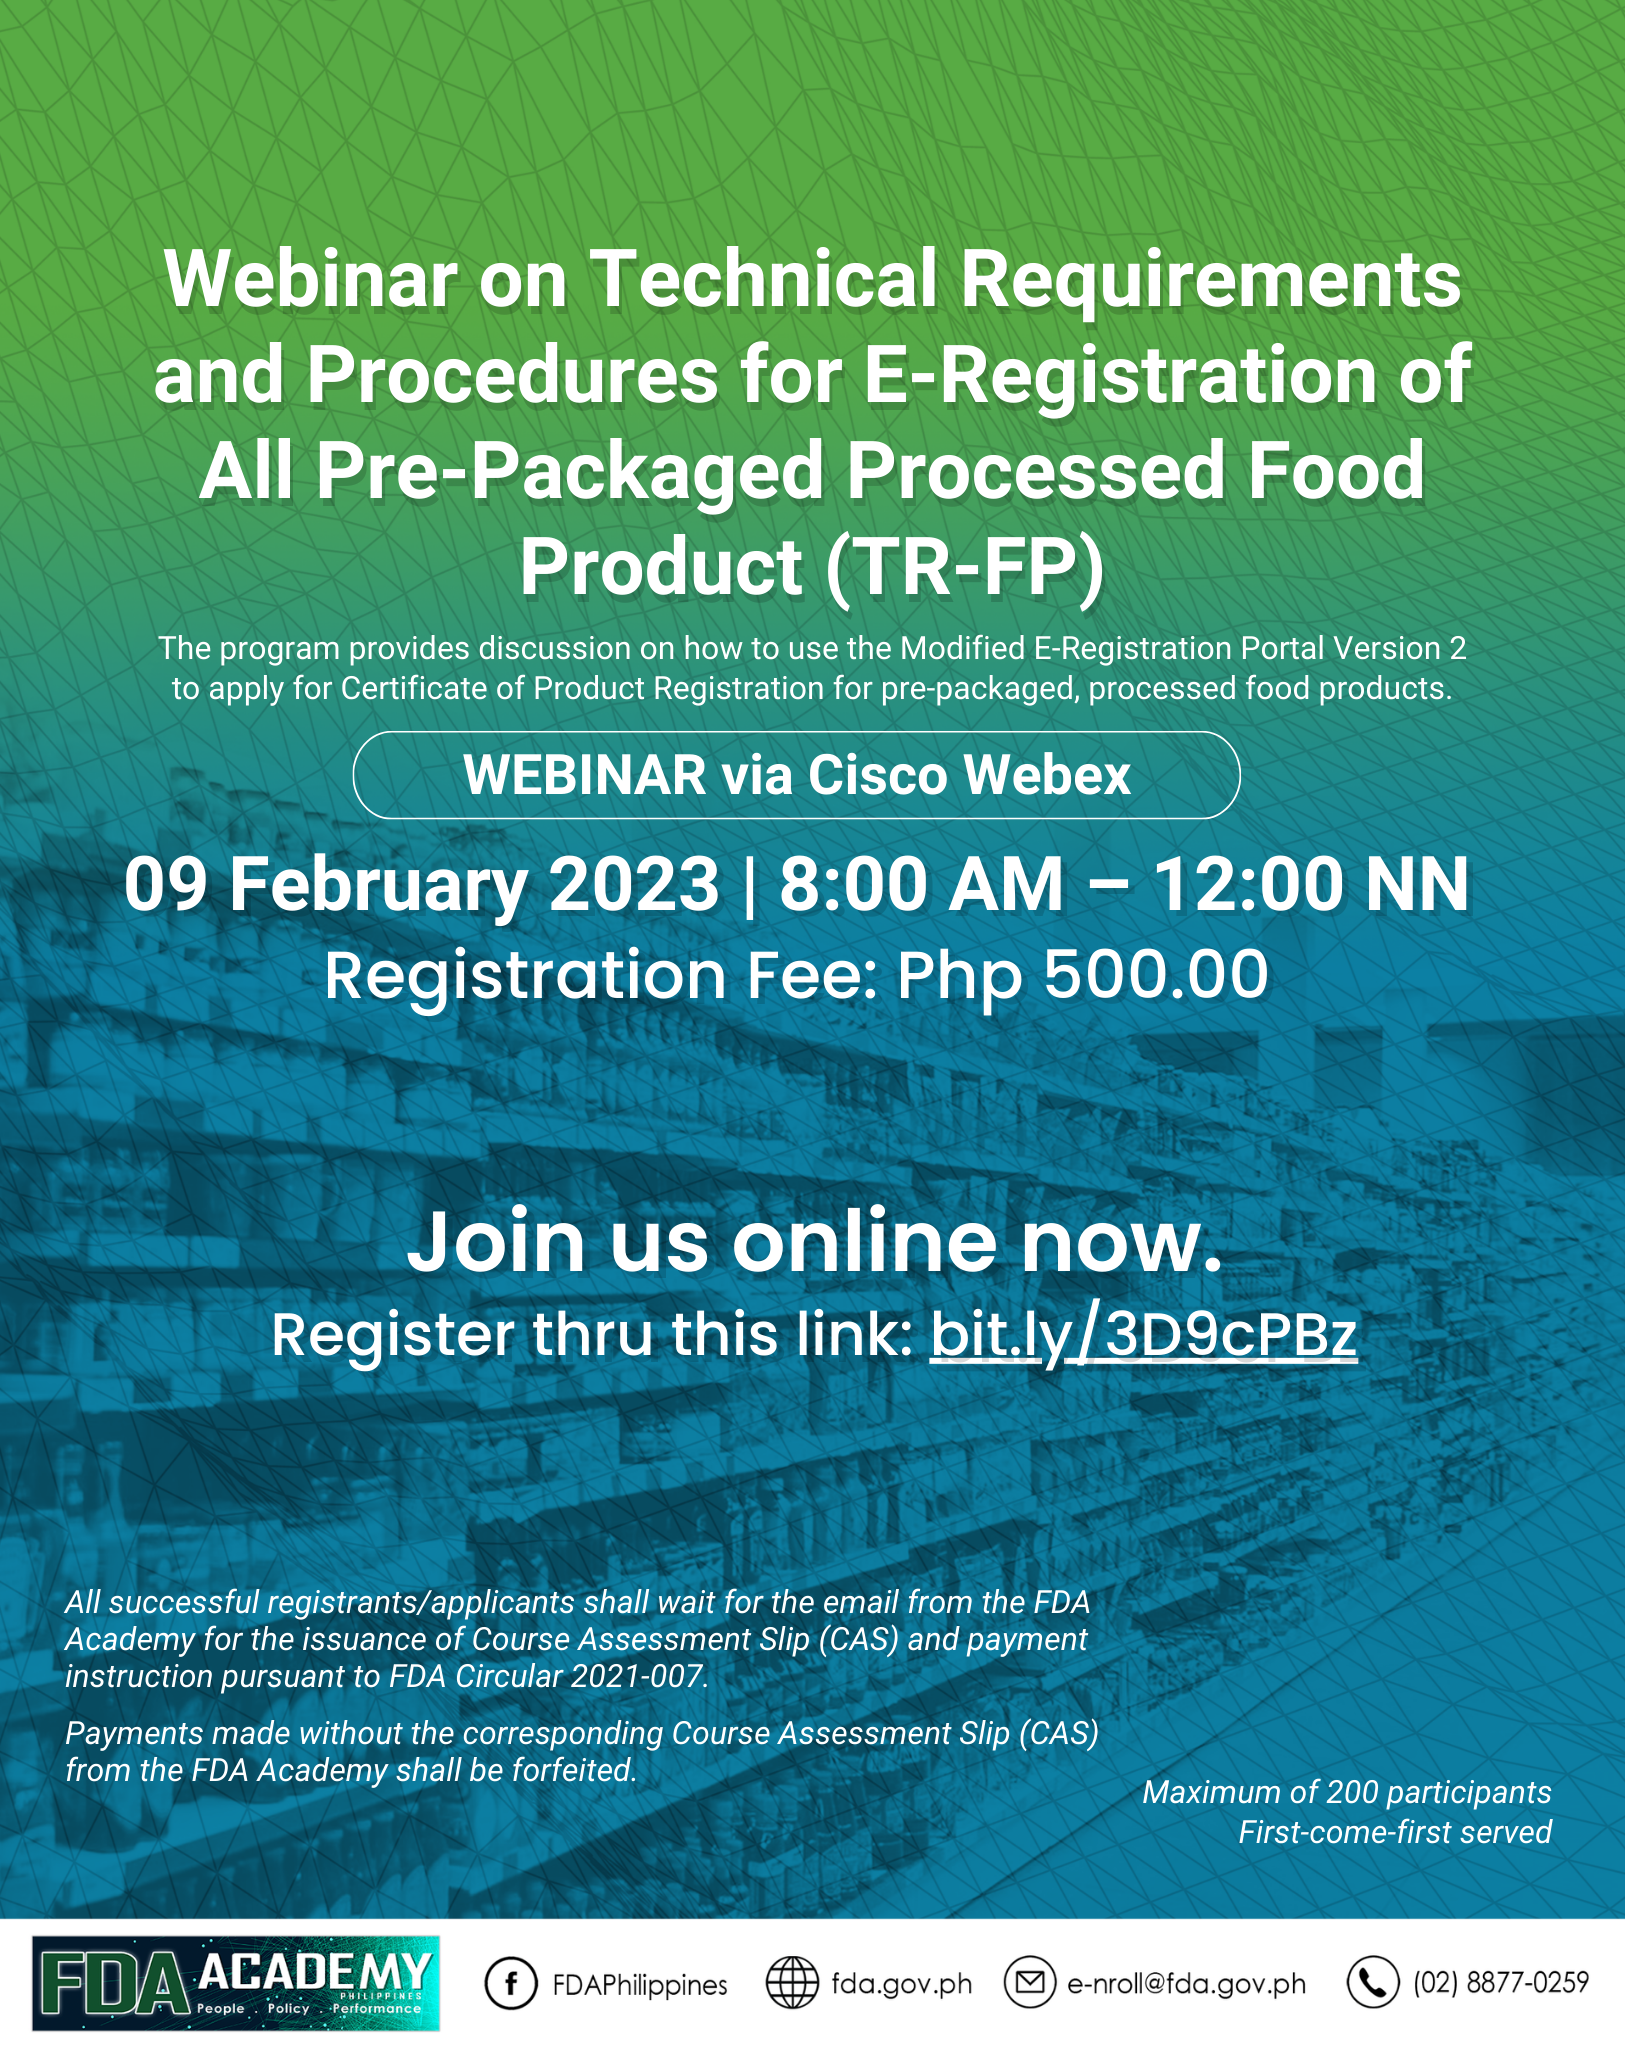 Webinar on Technical Requirements and Procedures for E-Registration of all Pre-Packaged Processes Food Products (TR-FP)